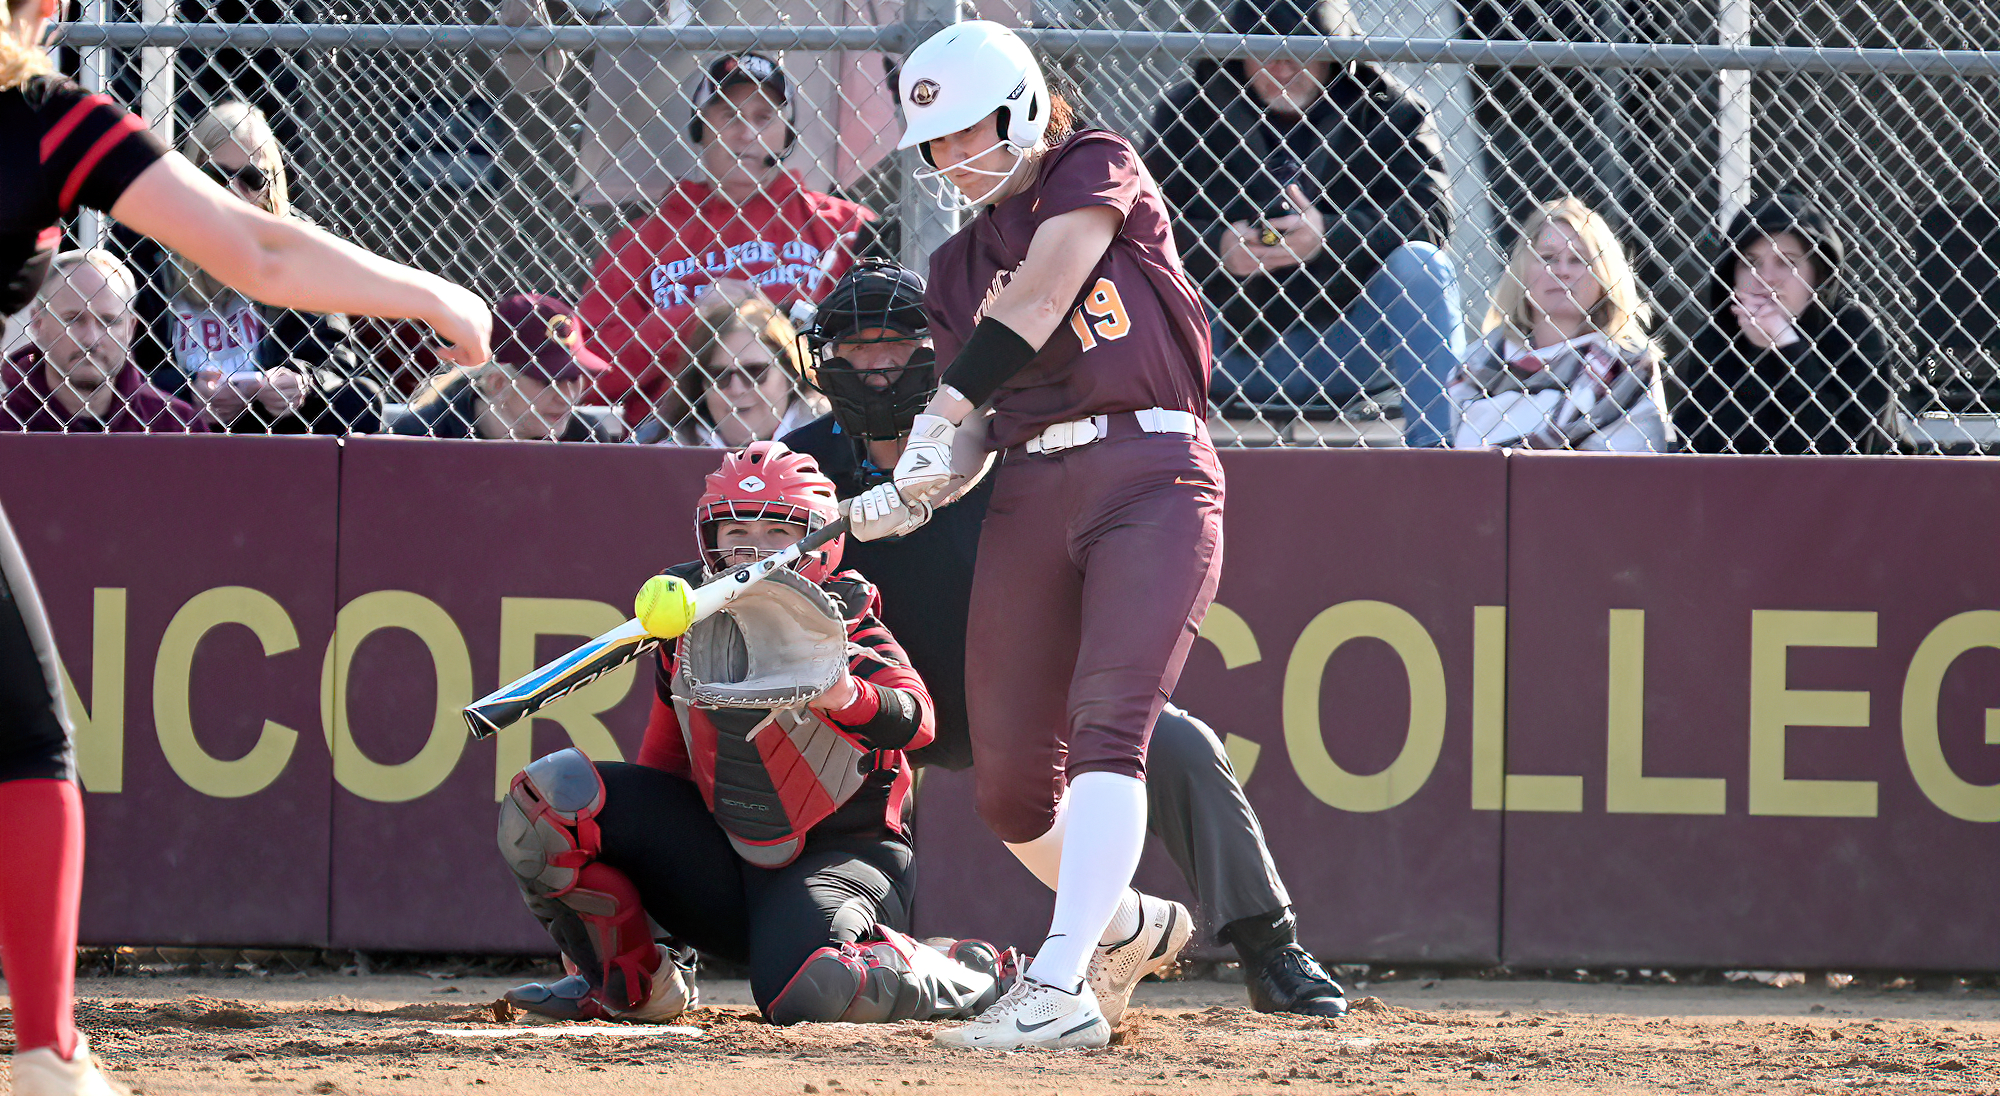 Danielle Lyon connects on a single in Game 2 of the Cobbers' home opener against St. Benedict. She went 2-for-3 in the contest.